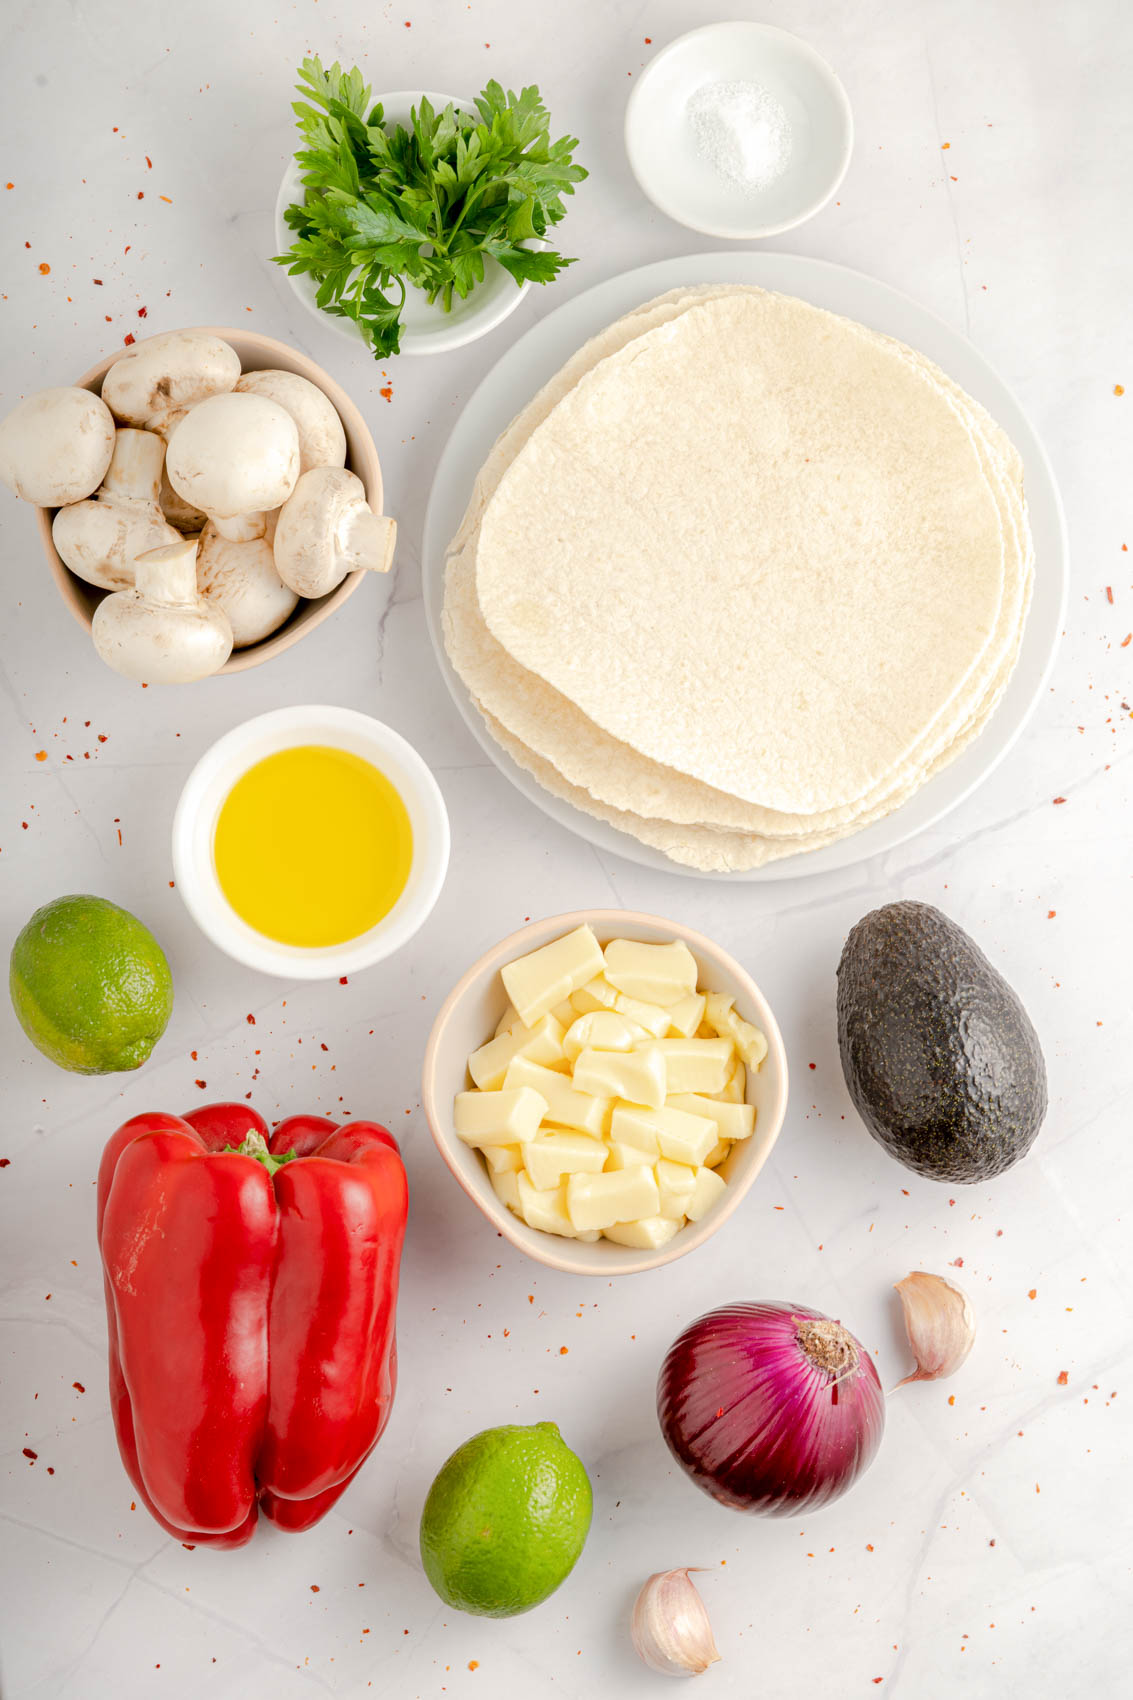 quesadilla ingredients, including red pepper, tortillas, garlic, butter, avocado, red onion, mushrooms, lime and cilantro